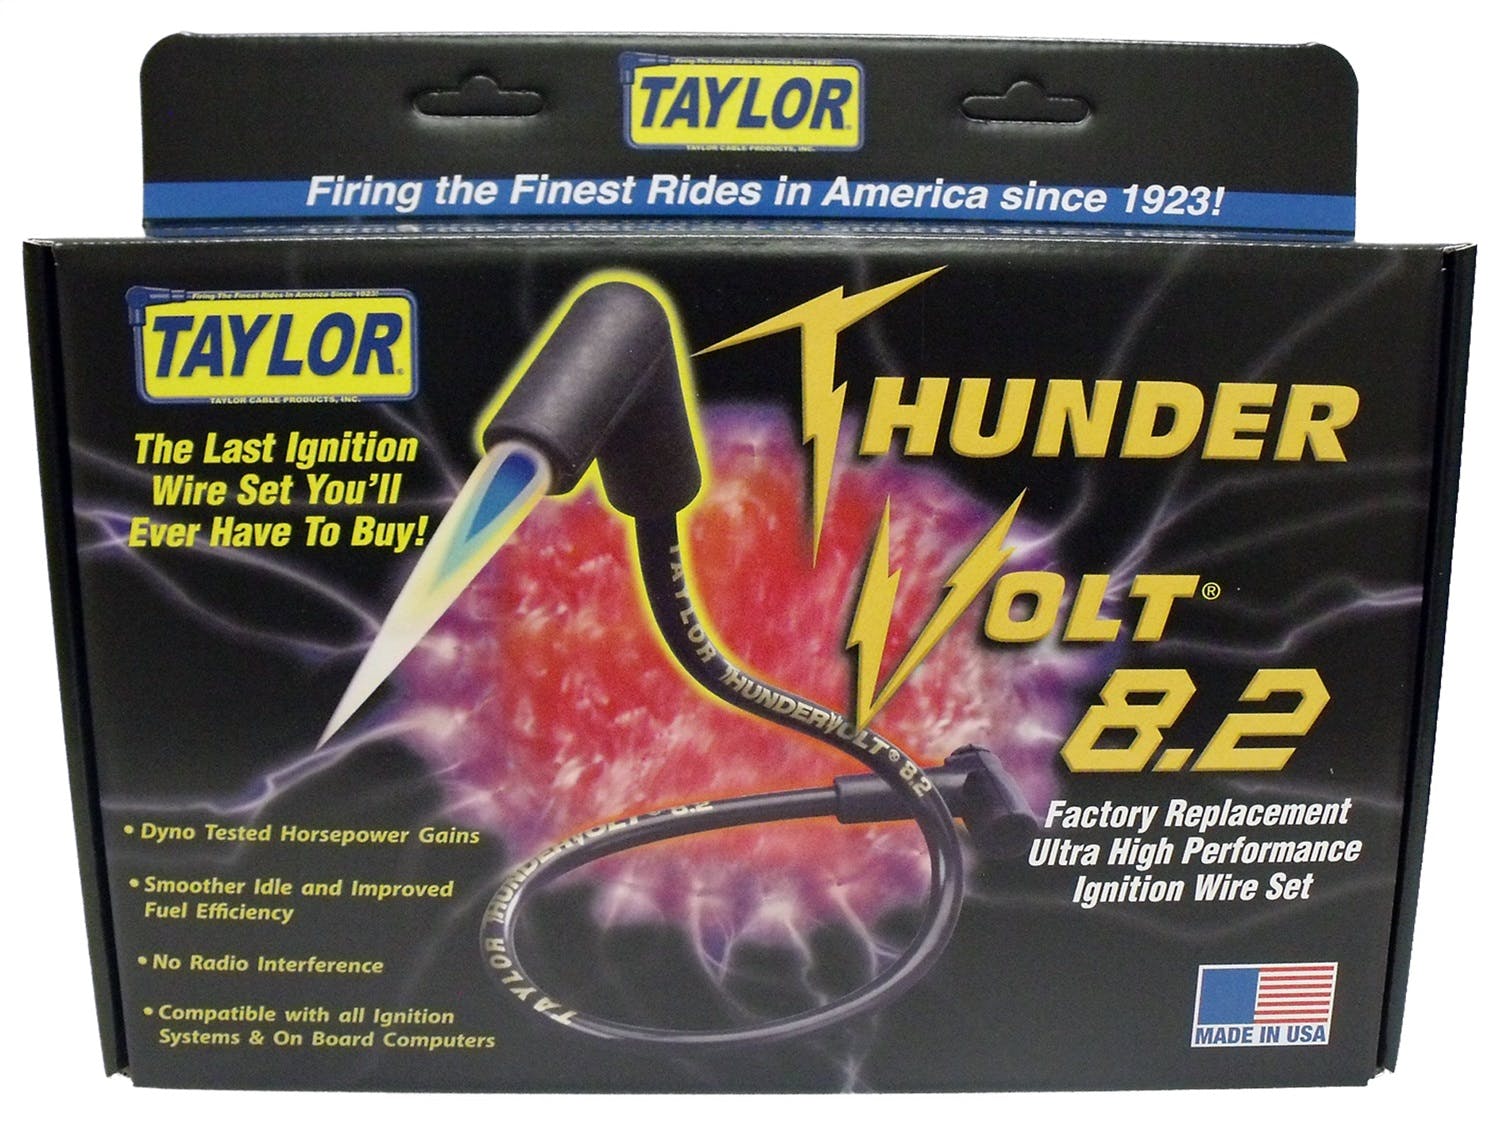 Taylor Cable Products 86227 Thundervolt 8.2 race fit 8 cyl red